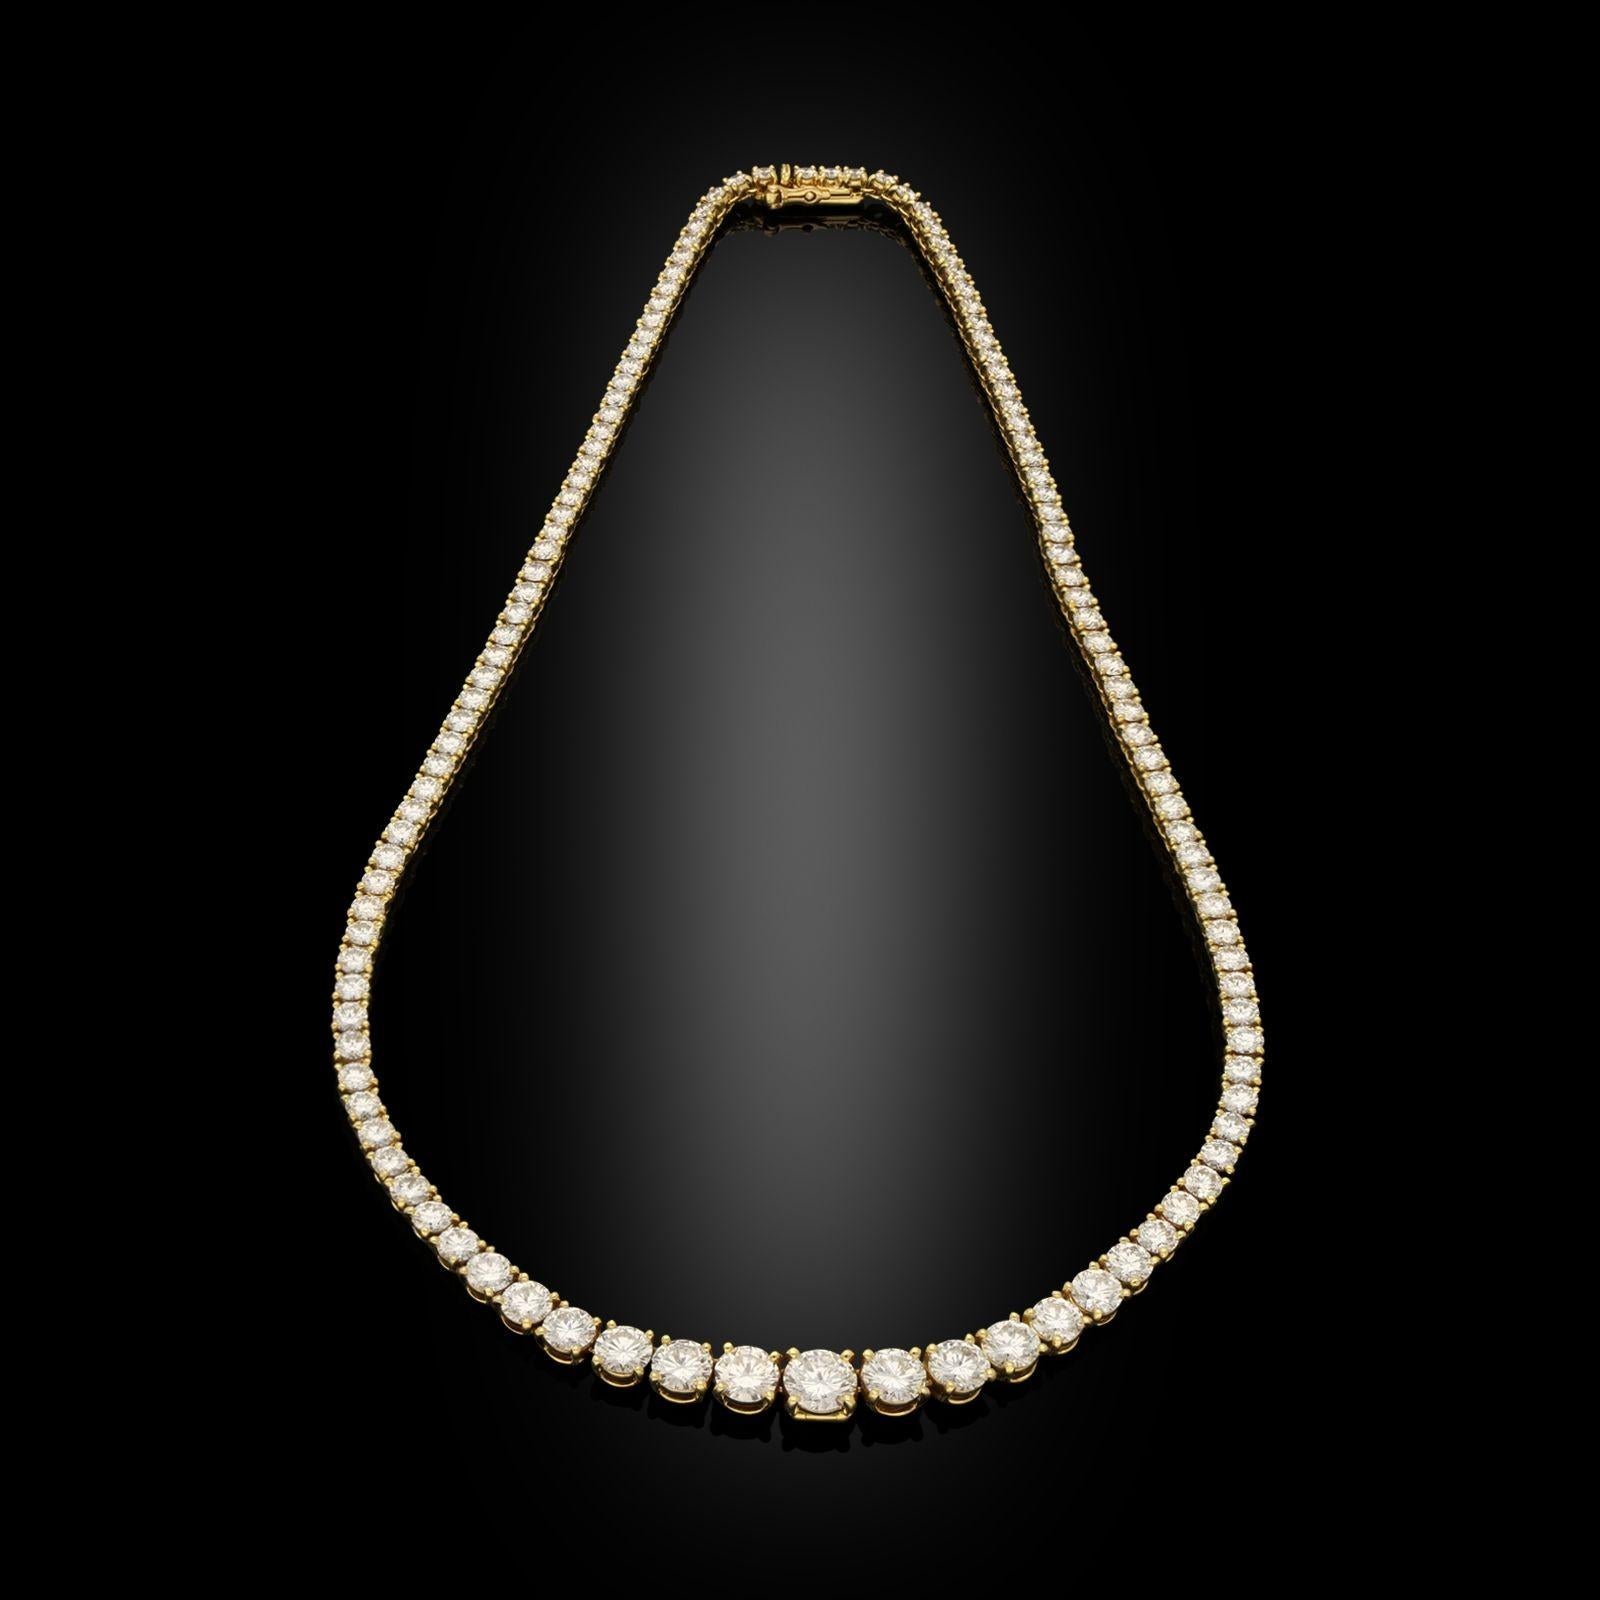 A classic 'Tennis' 18ct gold and diamond line riviere necklace by Cartier c.2006, the necklace of tapering form composed of one hundred and nineteen graduated round brilliant cut diamonds weighing 16.50cts in total, all claw set in 18ct yellow gold